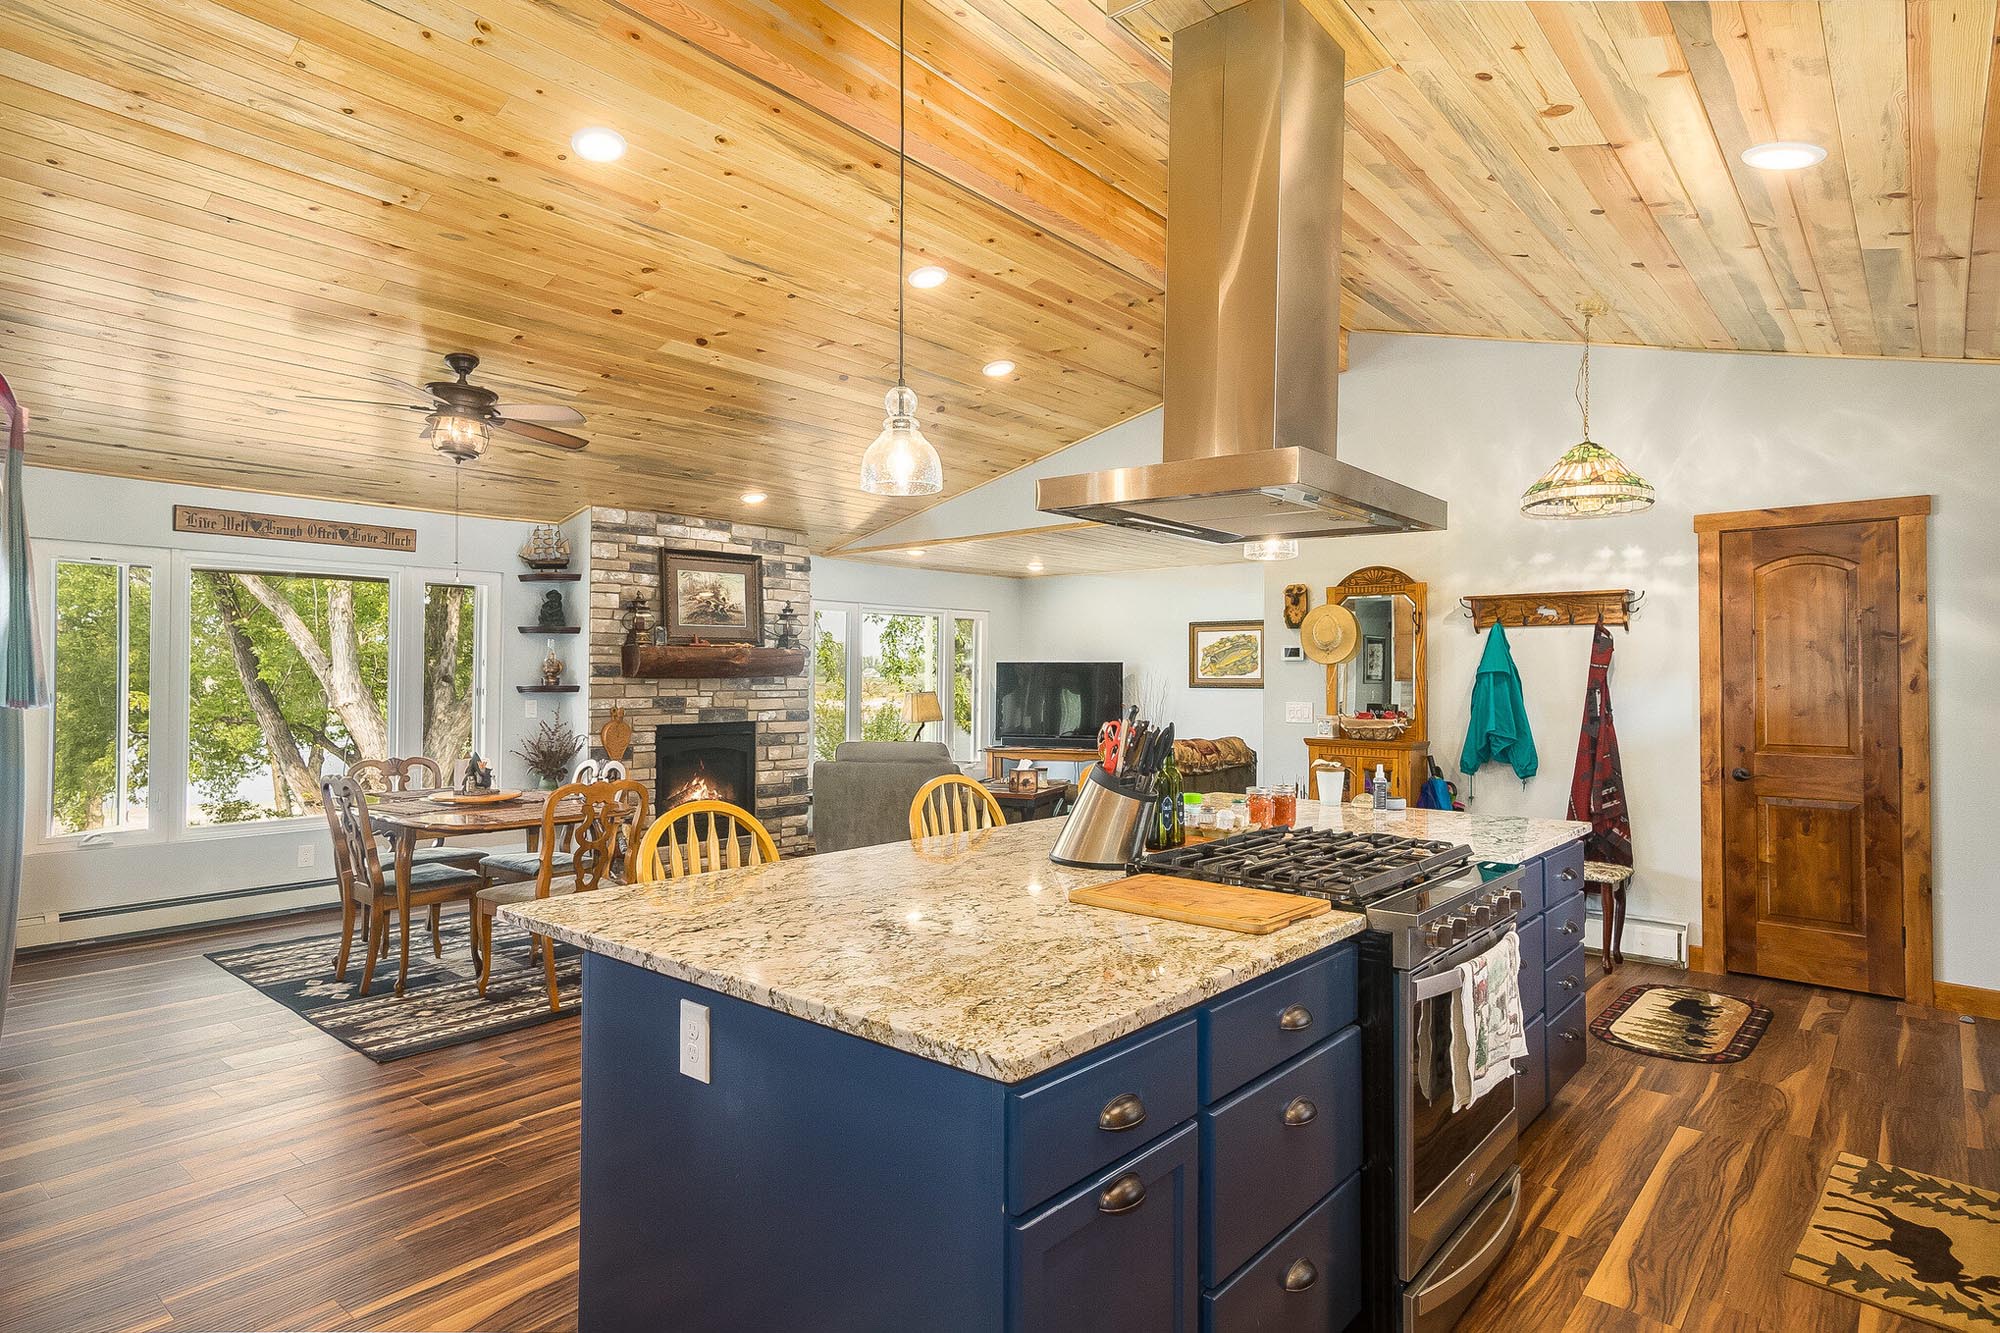 Rustic style kitchen with wooden ceiling and dark blue cabinets